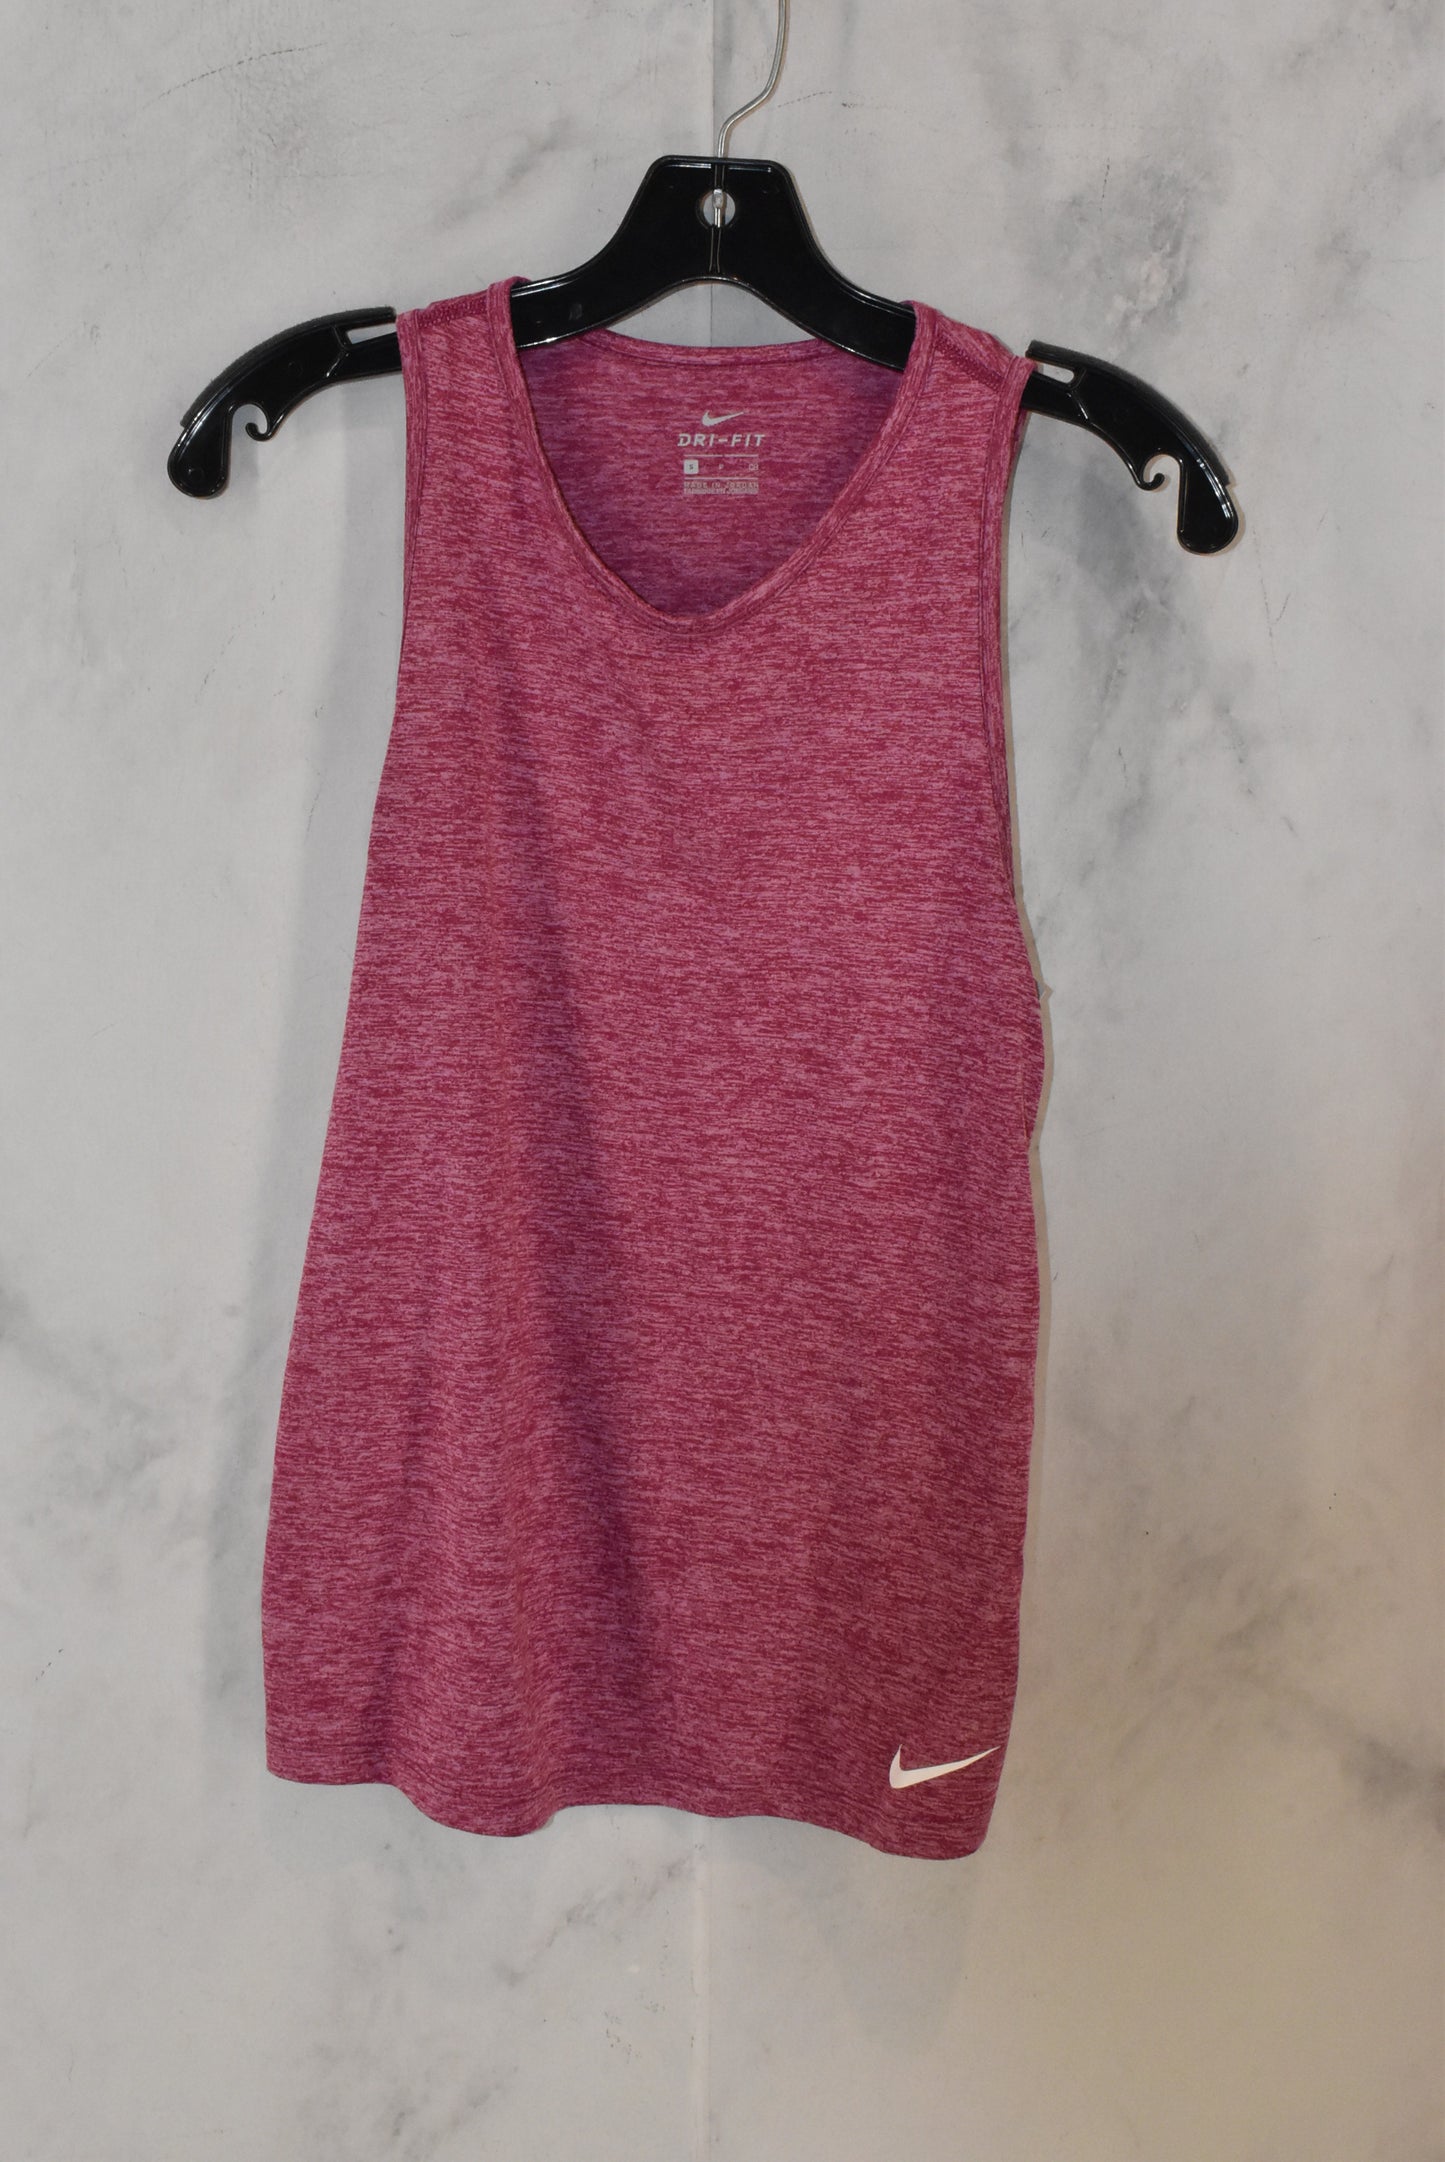 Athletic Tank Top By Nike  Size: S